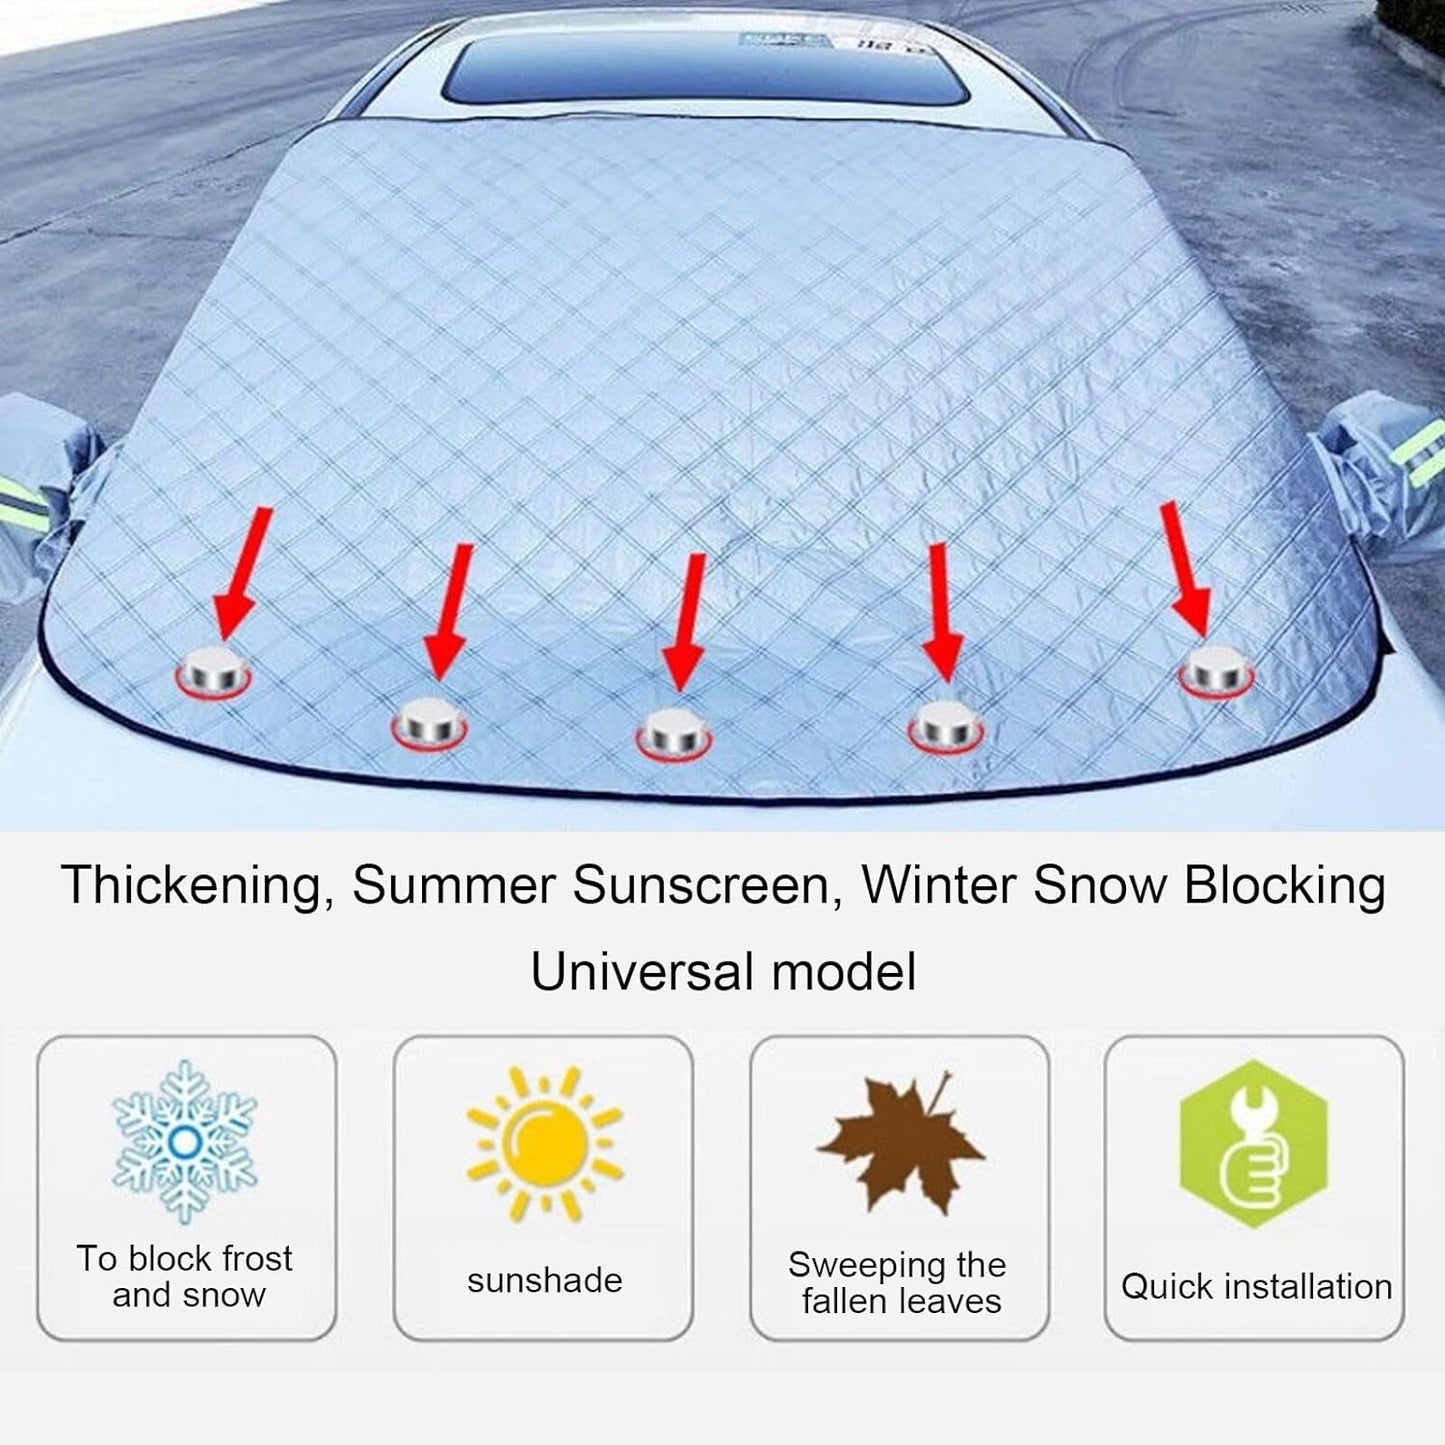 SUV Car Windscreen Covers Frost Snow Ice,Magnetic Car Windscreen Cover for Winter Car Windshield Cover with Side Wing Mirror Cover,Car Frost Windscreen Cover against Snow,Ice,Frost,Sun (148×116Cm)